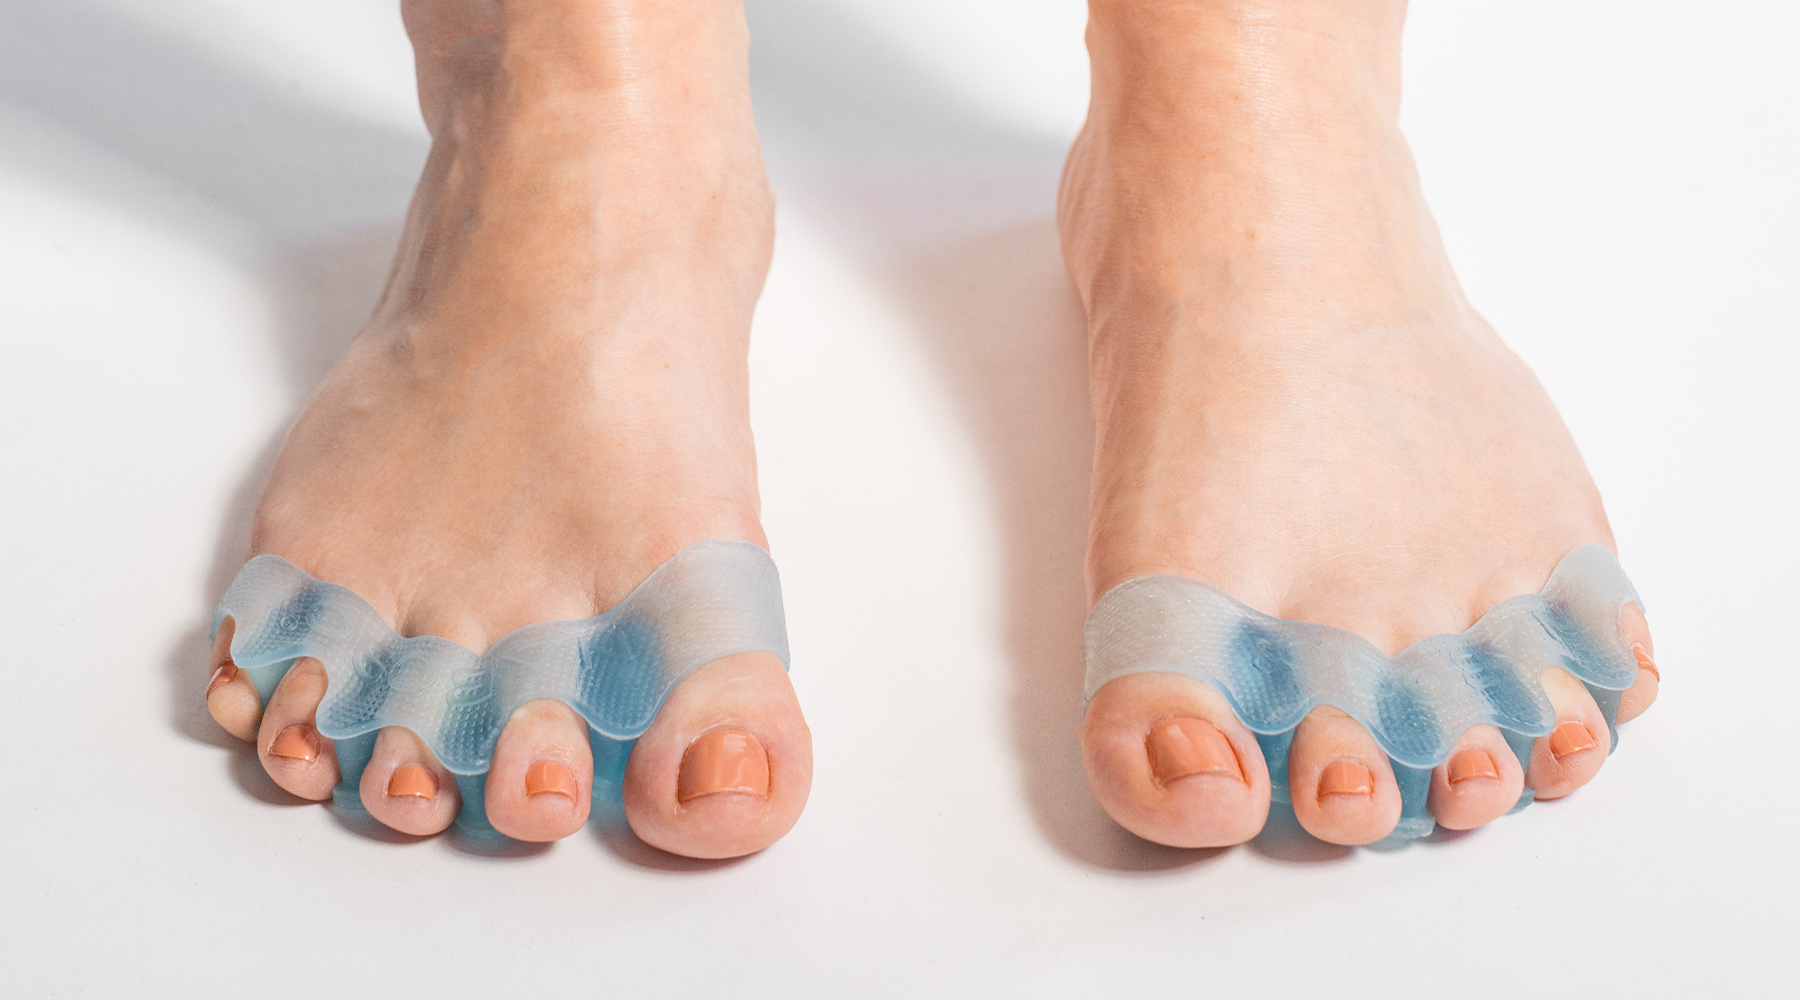 Products that Prevent Bunions